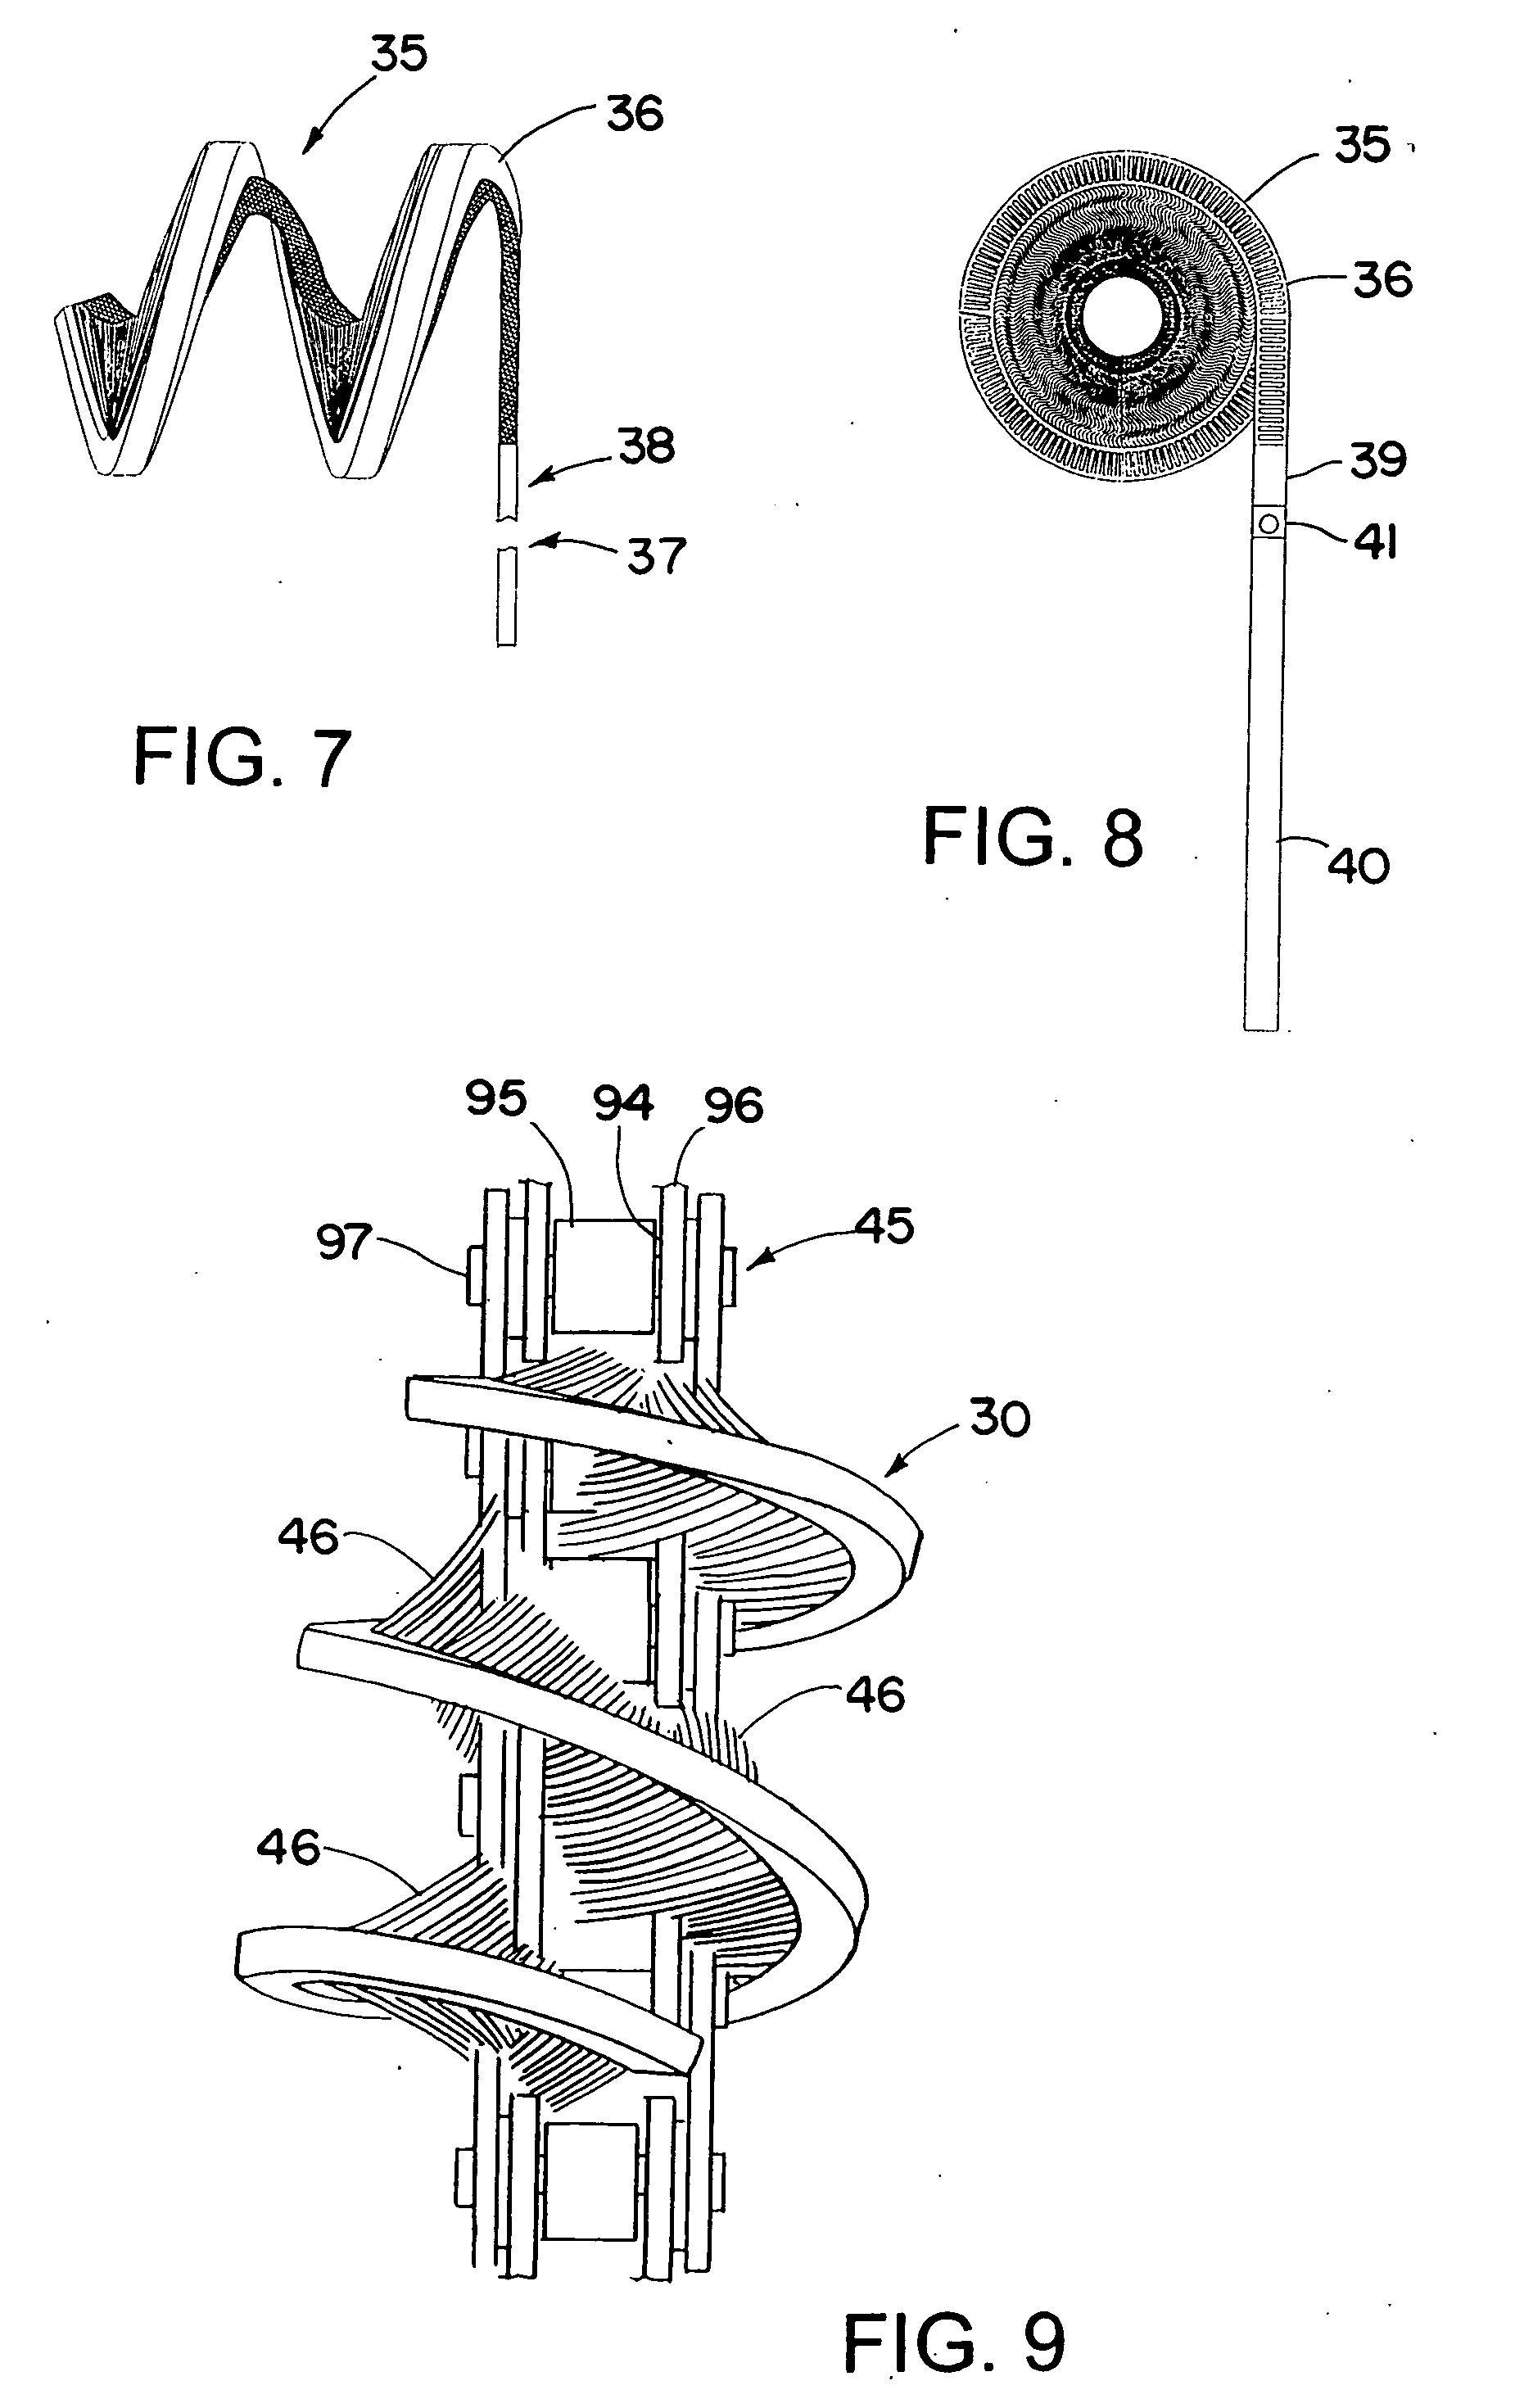 Drive chain or belt brush cleaner and method